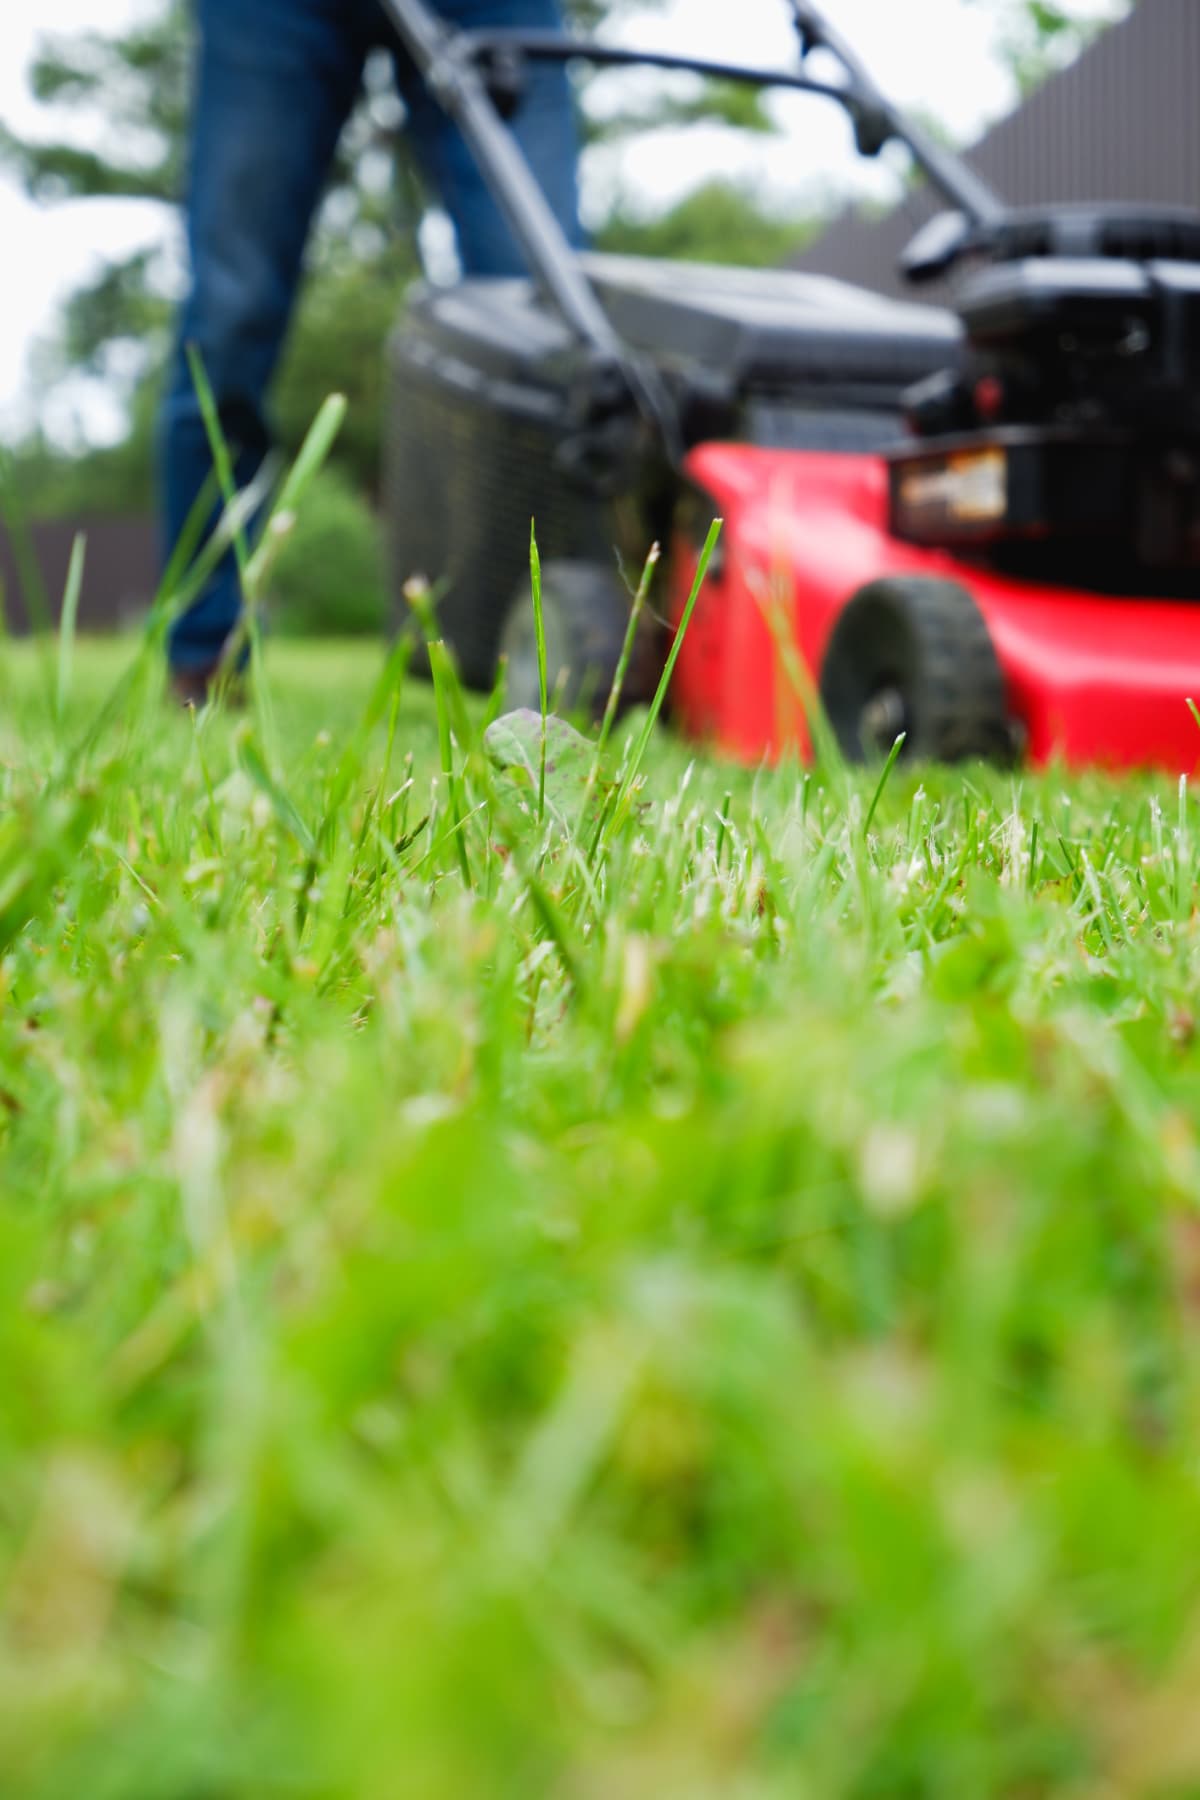 A man in a plaid shirt and blue jeans mows the grass with a lawn mower. Gardening.